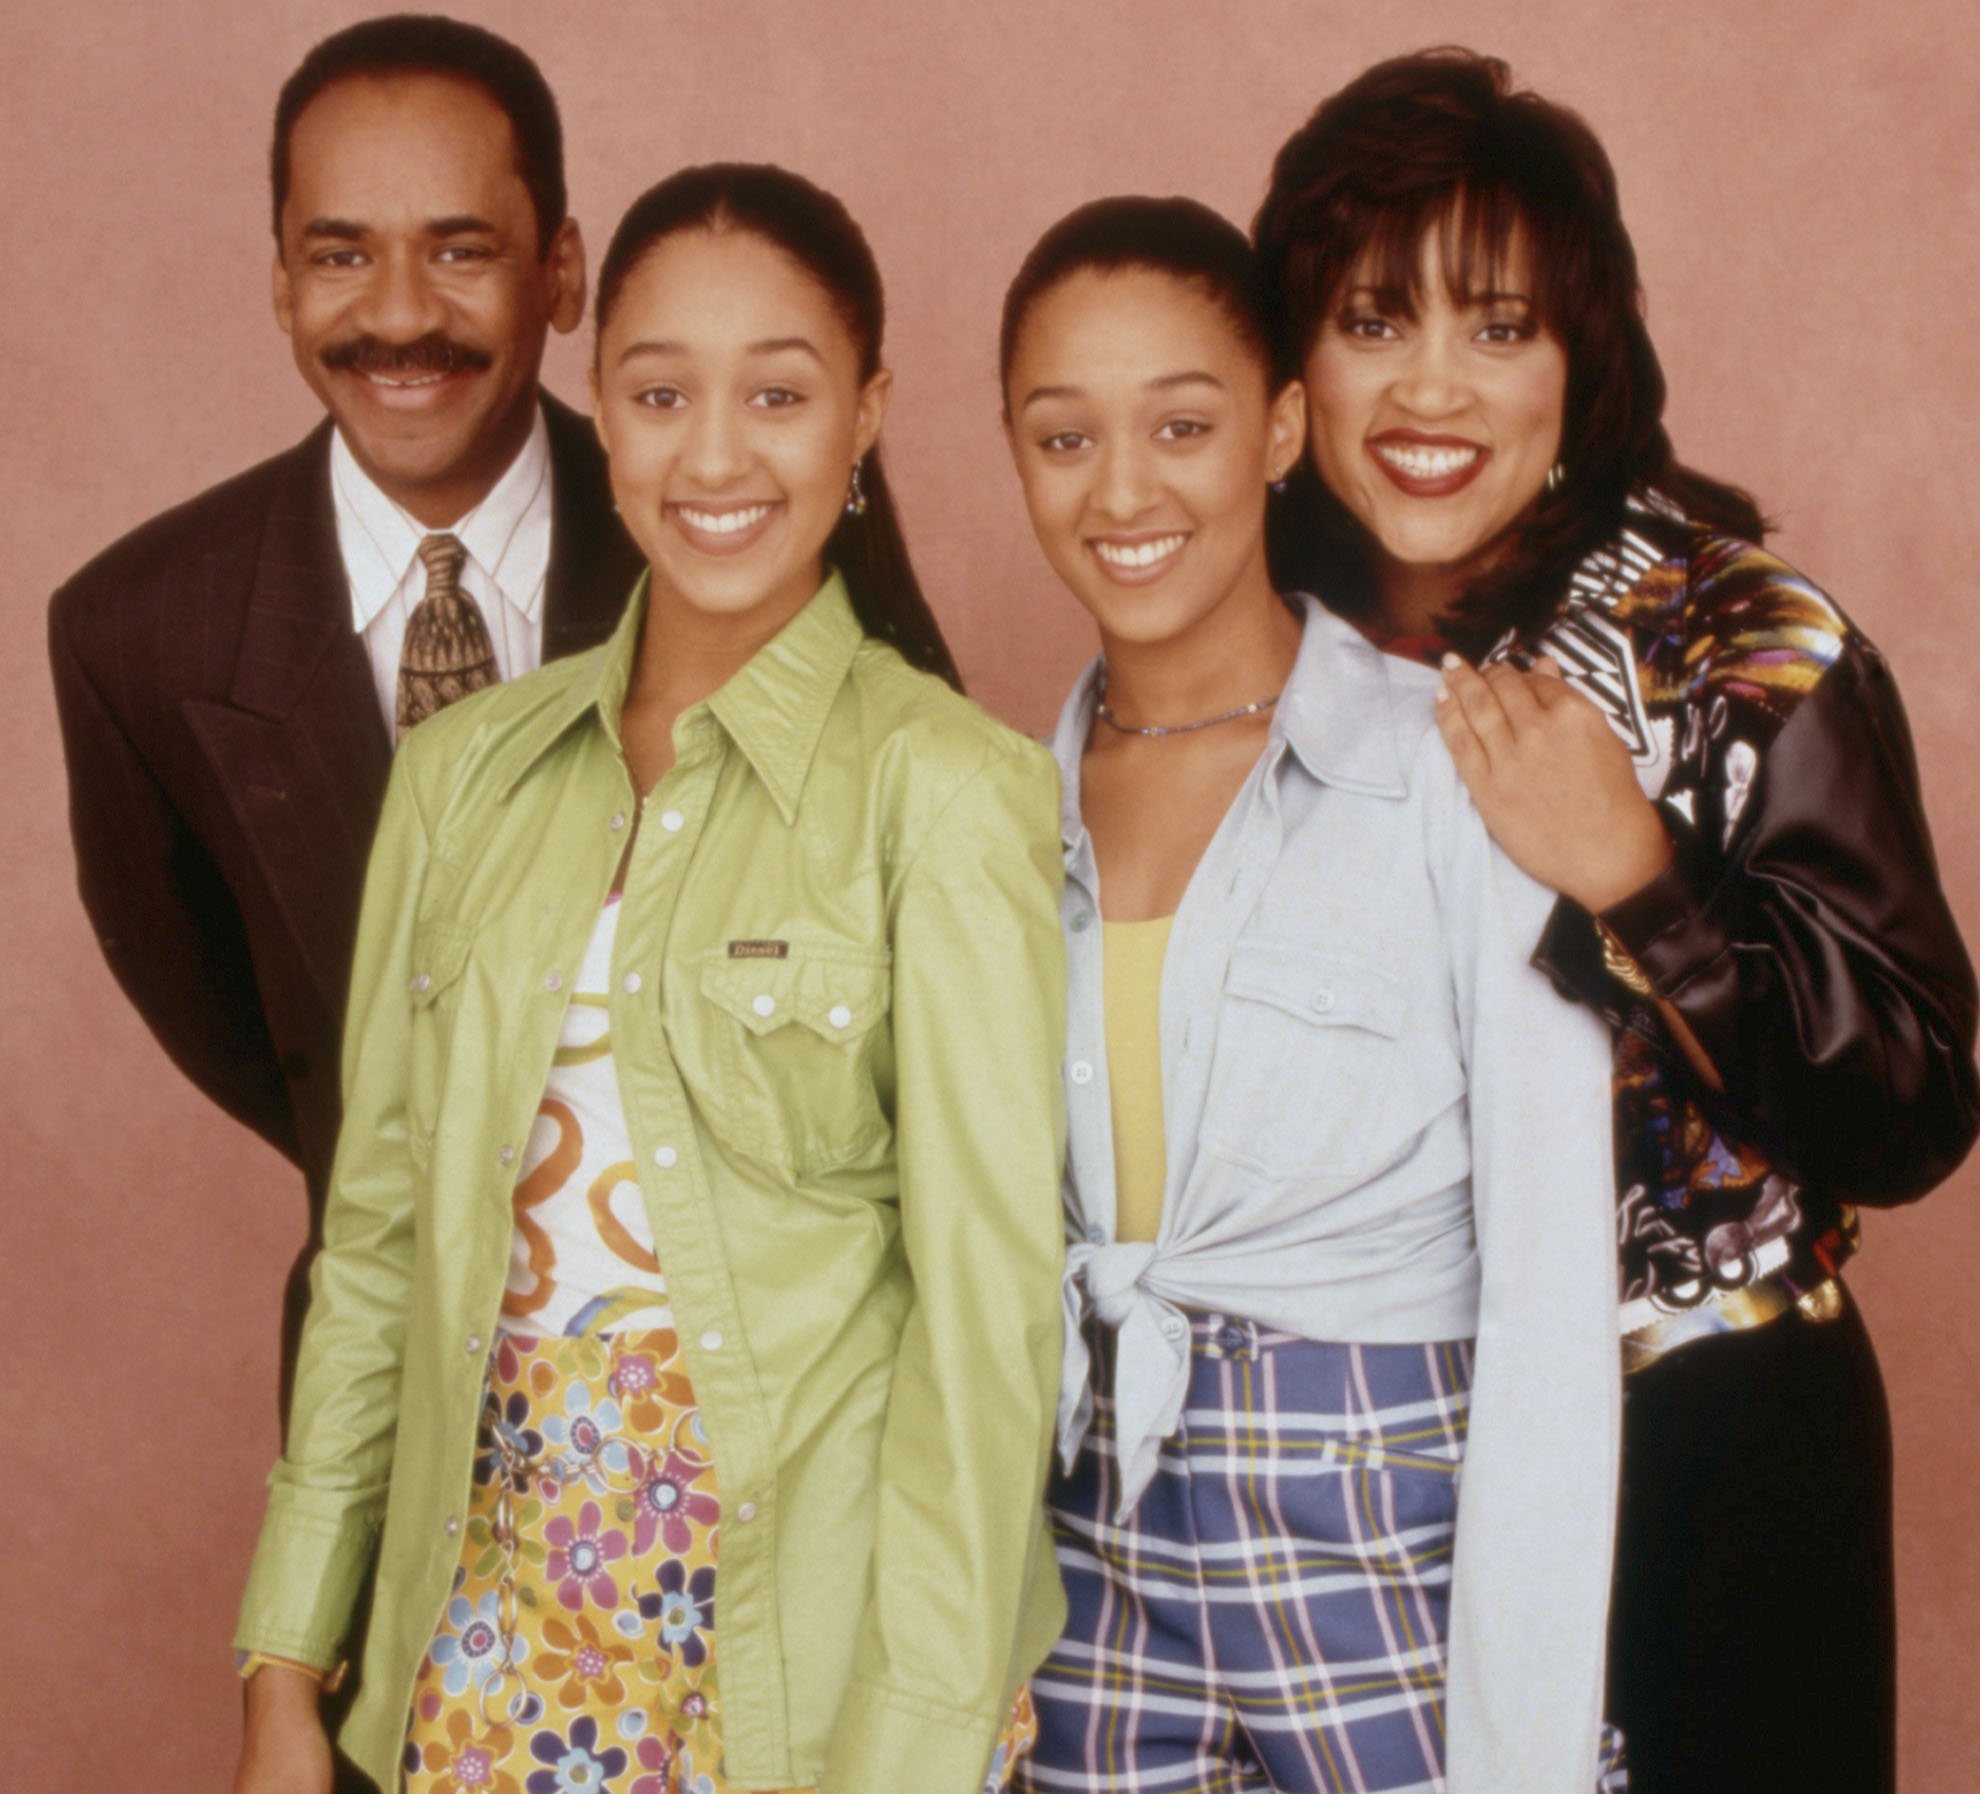 Sister, Sister Cast Quotes About the Reboot | POPSUGAR Entertainment